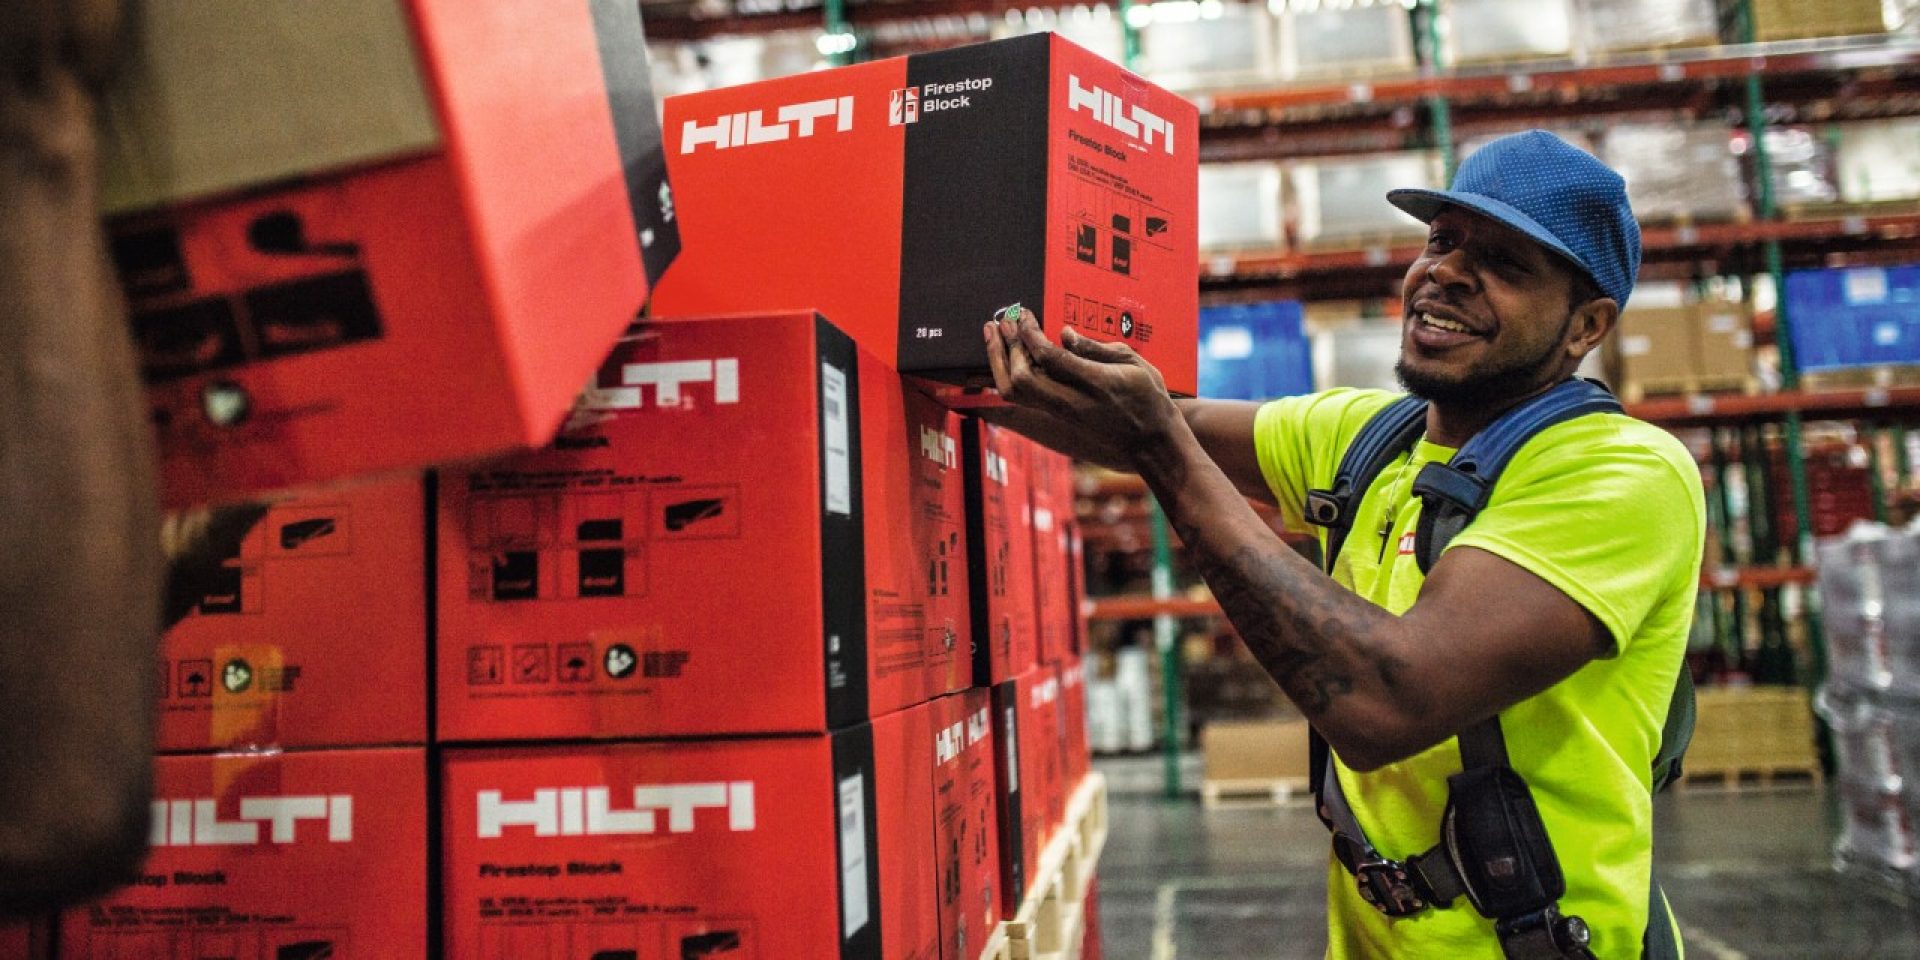 HILTI CONTINUES DOUBLE-DIGIT GROWTH RATE